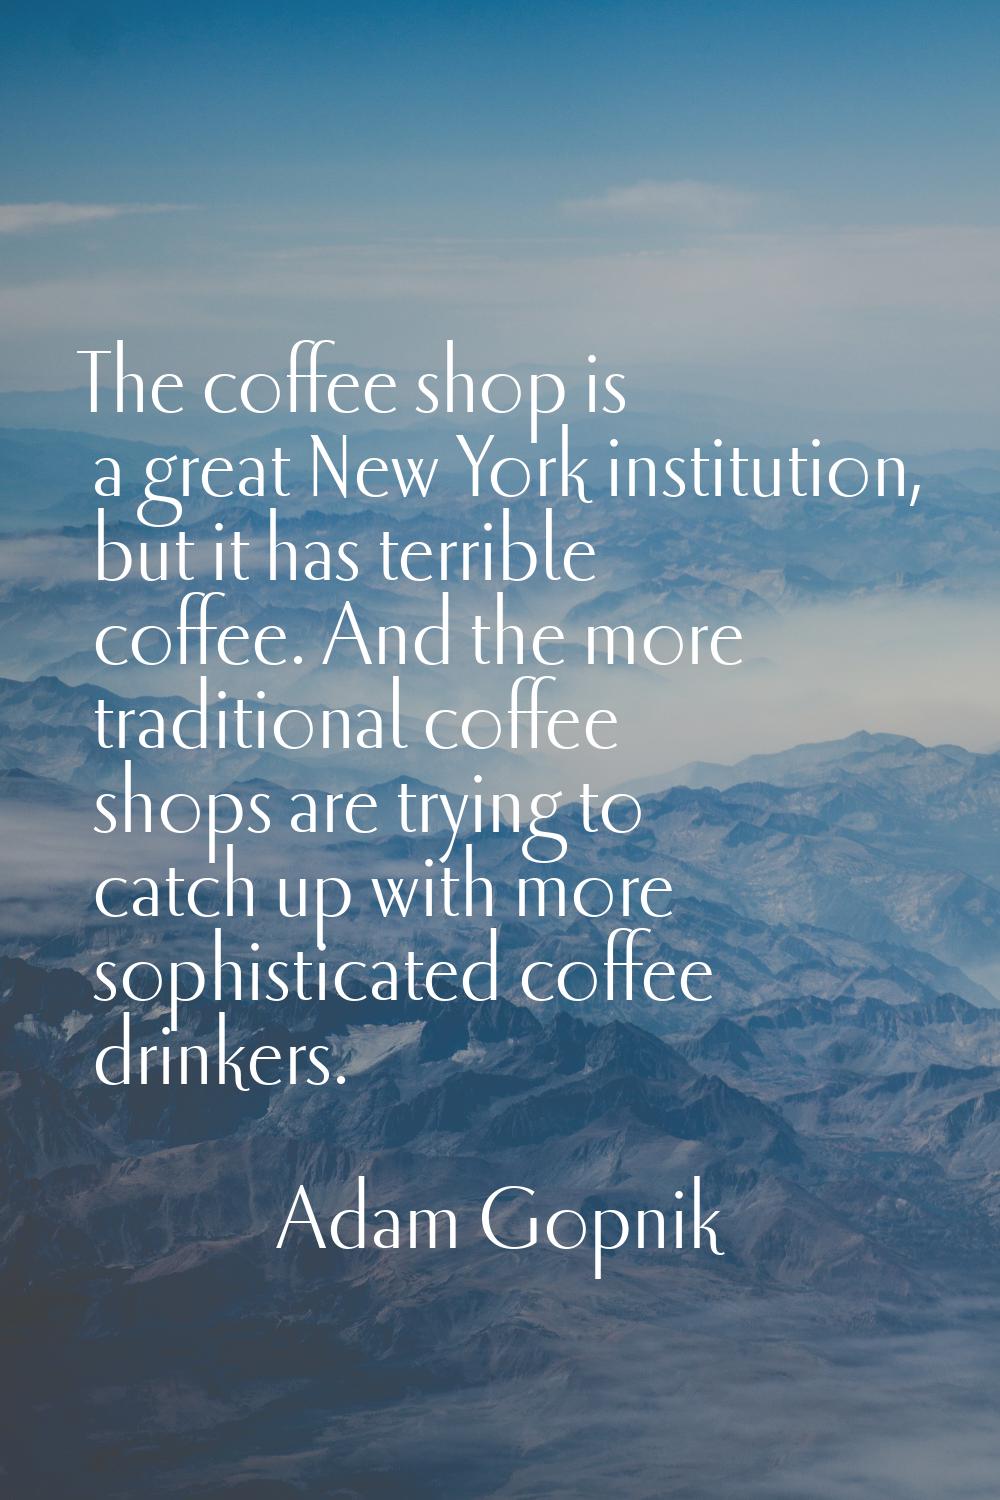 The coffee shop is a great New York institution, but it has terrible coffee. And the more tradition